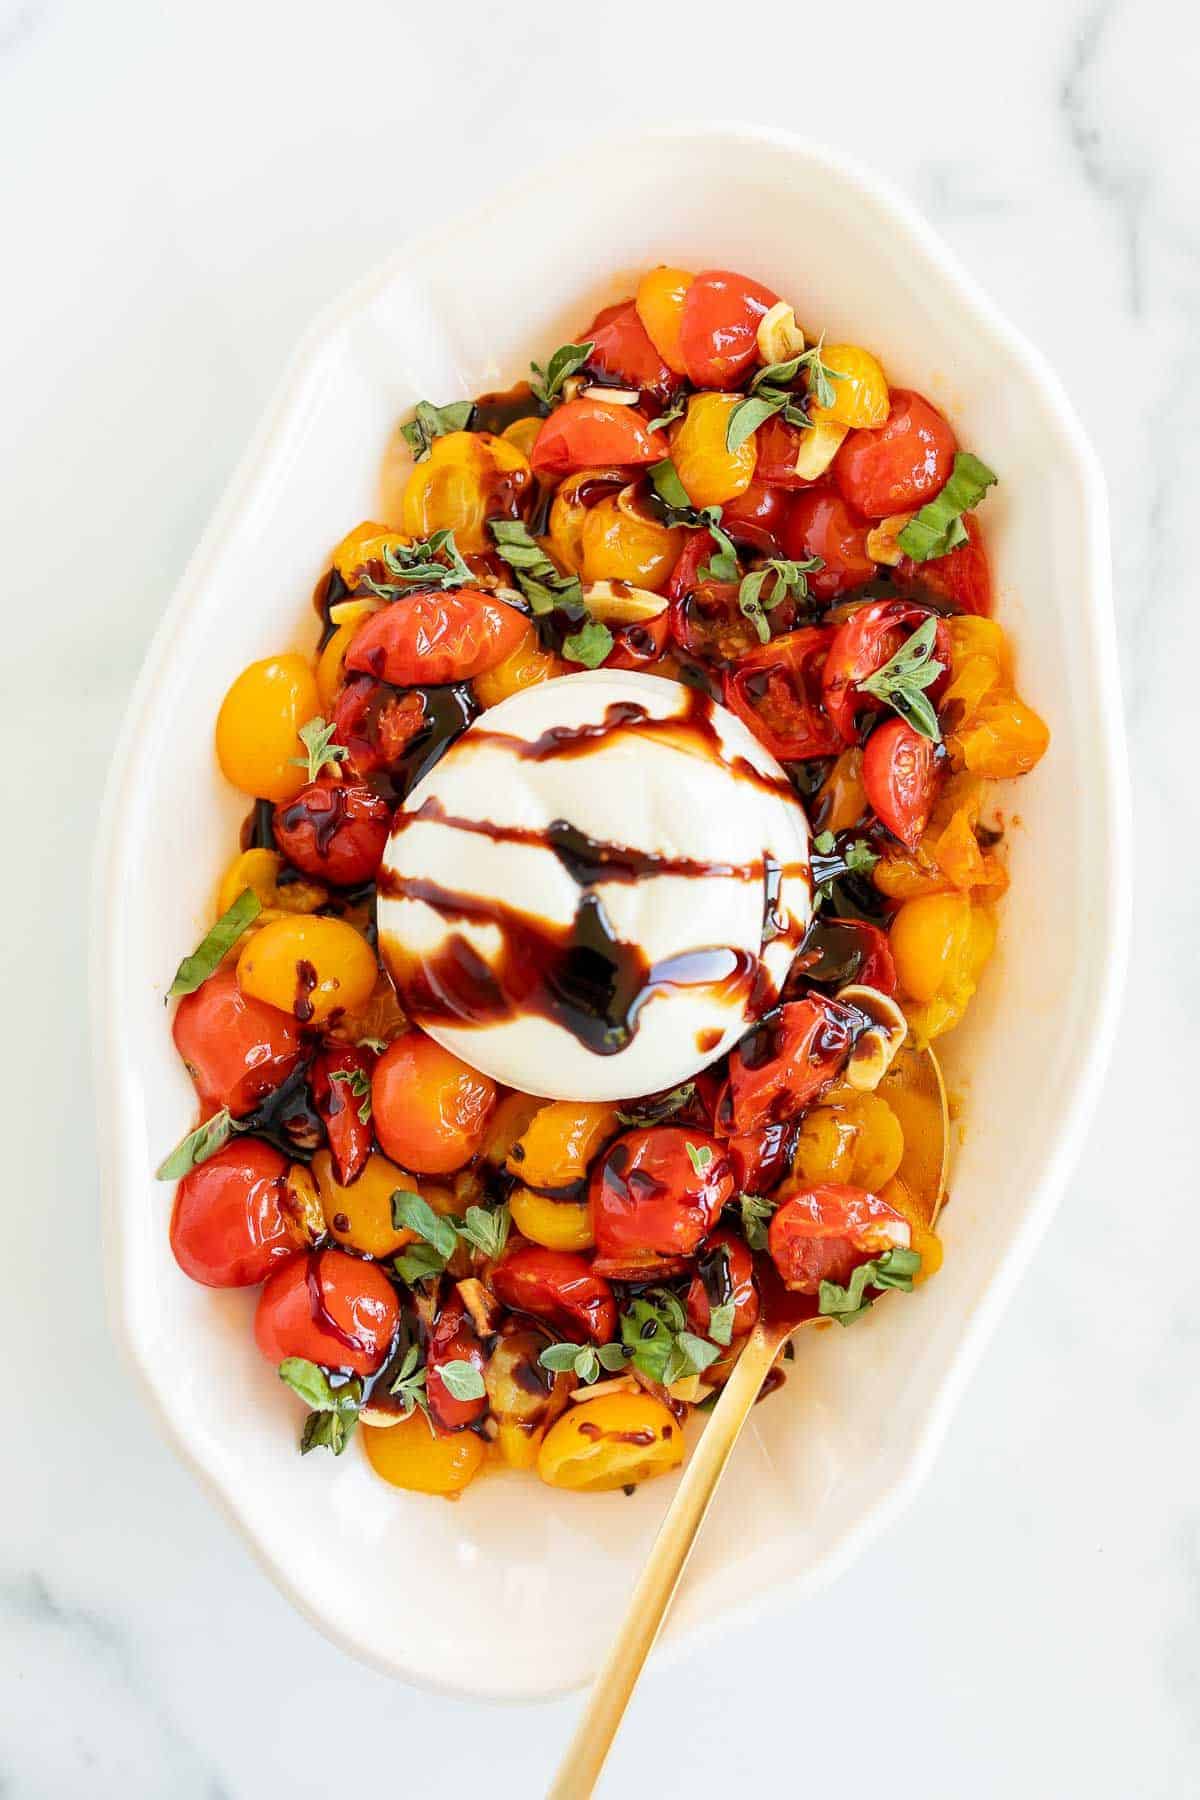 Baked burrata recipe surrounded by roasted cherry tomatoes in a white oval platter.